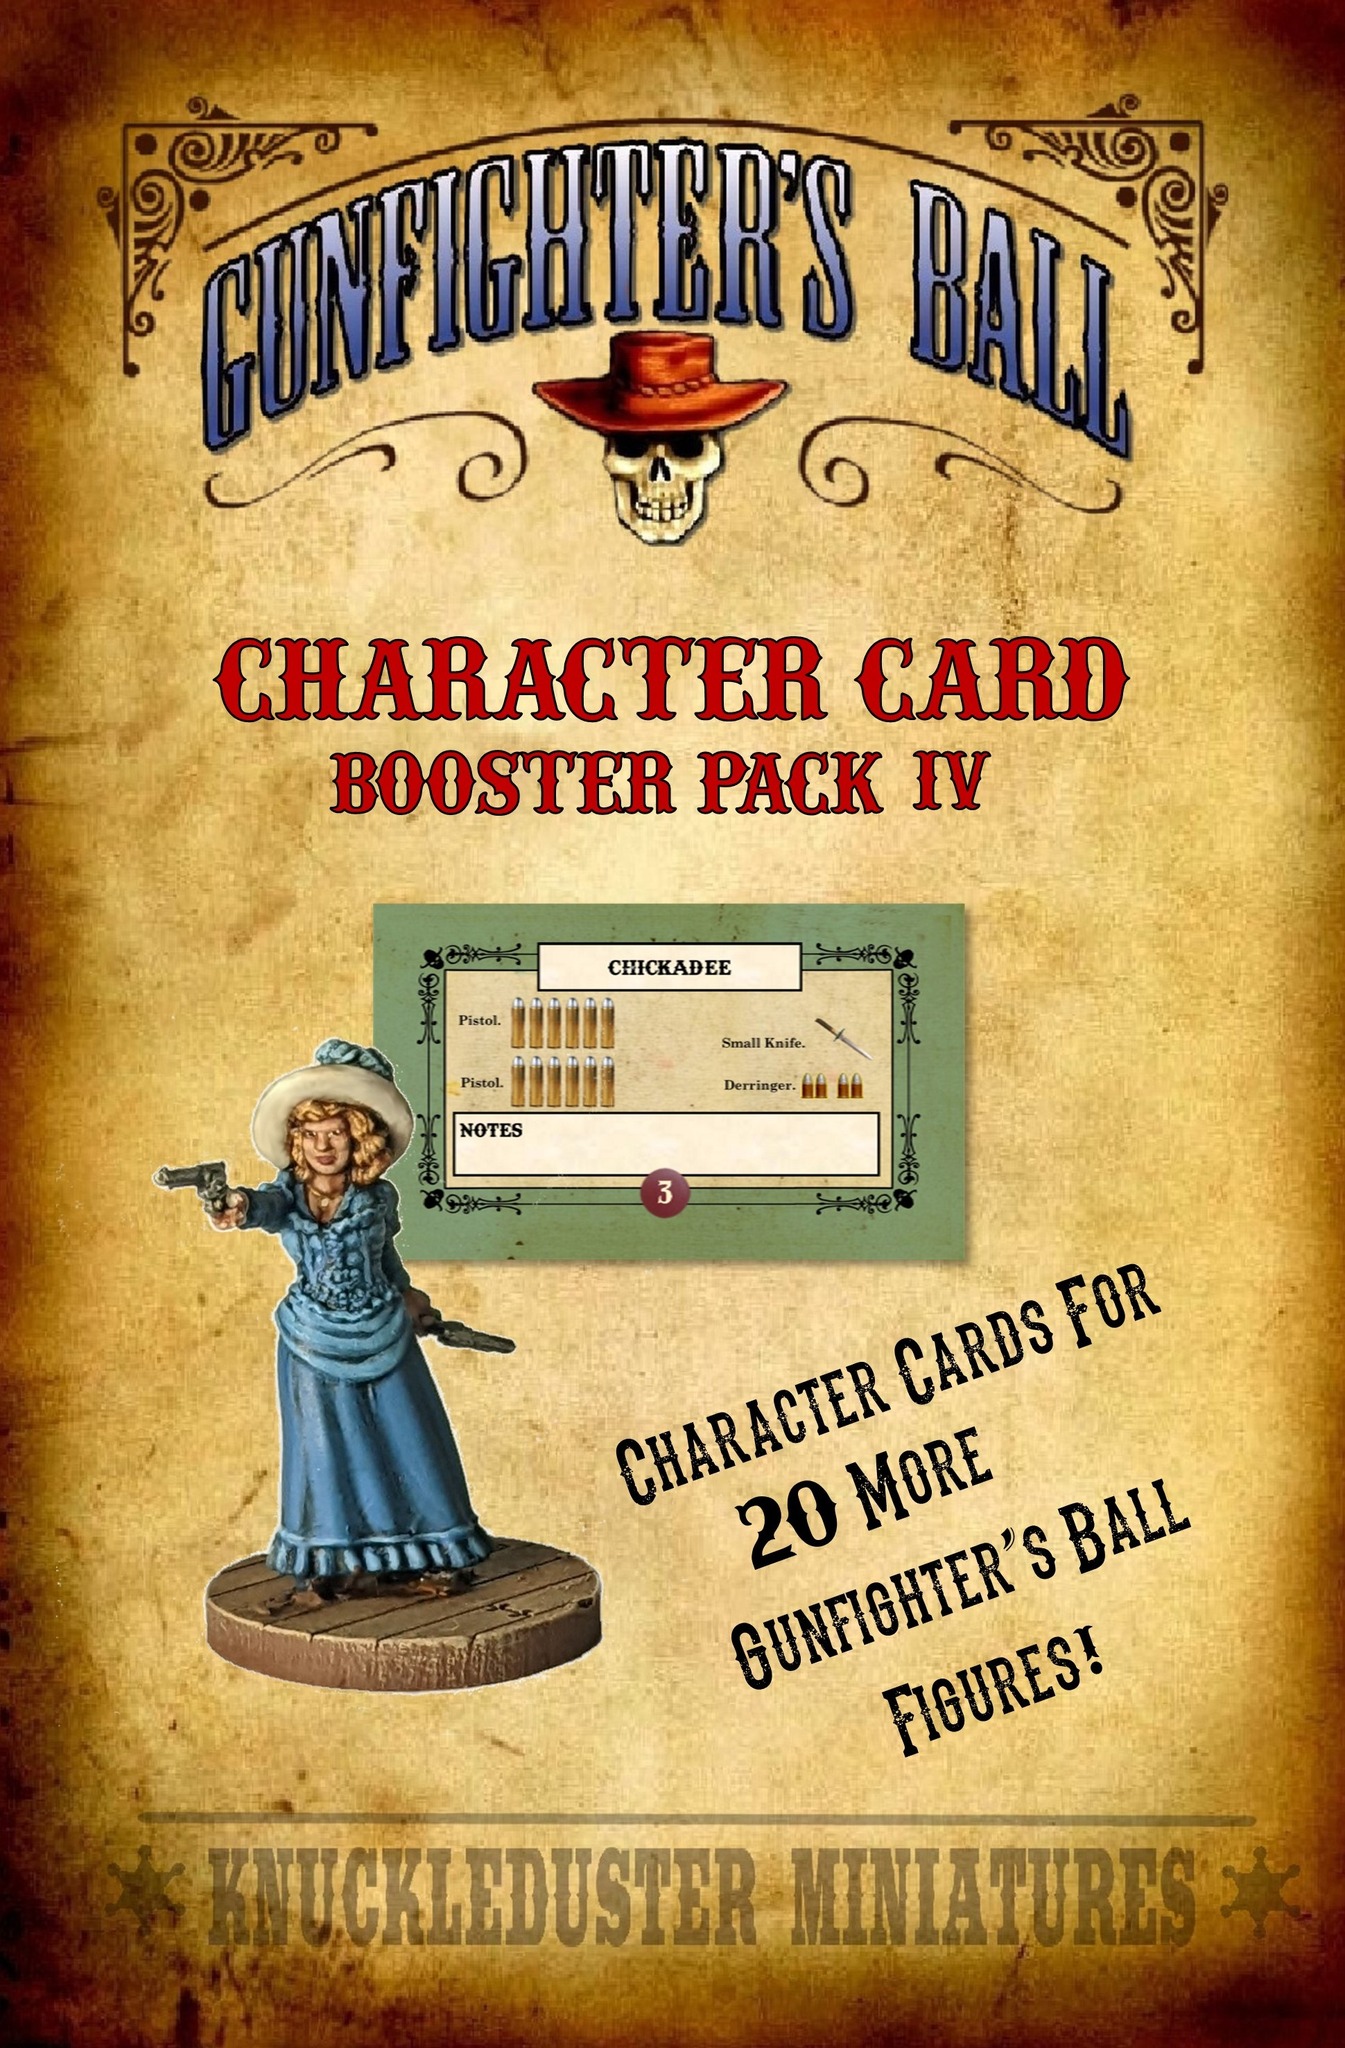 Character Card Booster Pack IV - Knuckleduster Miniatures